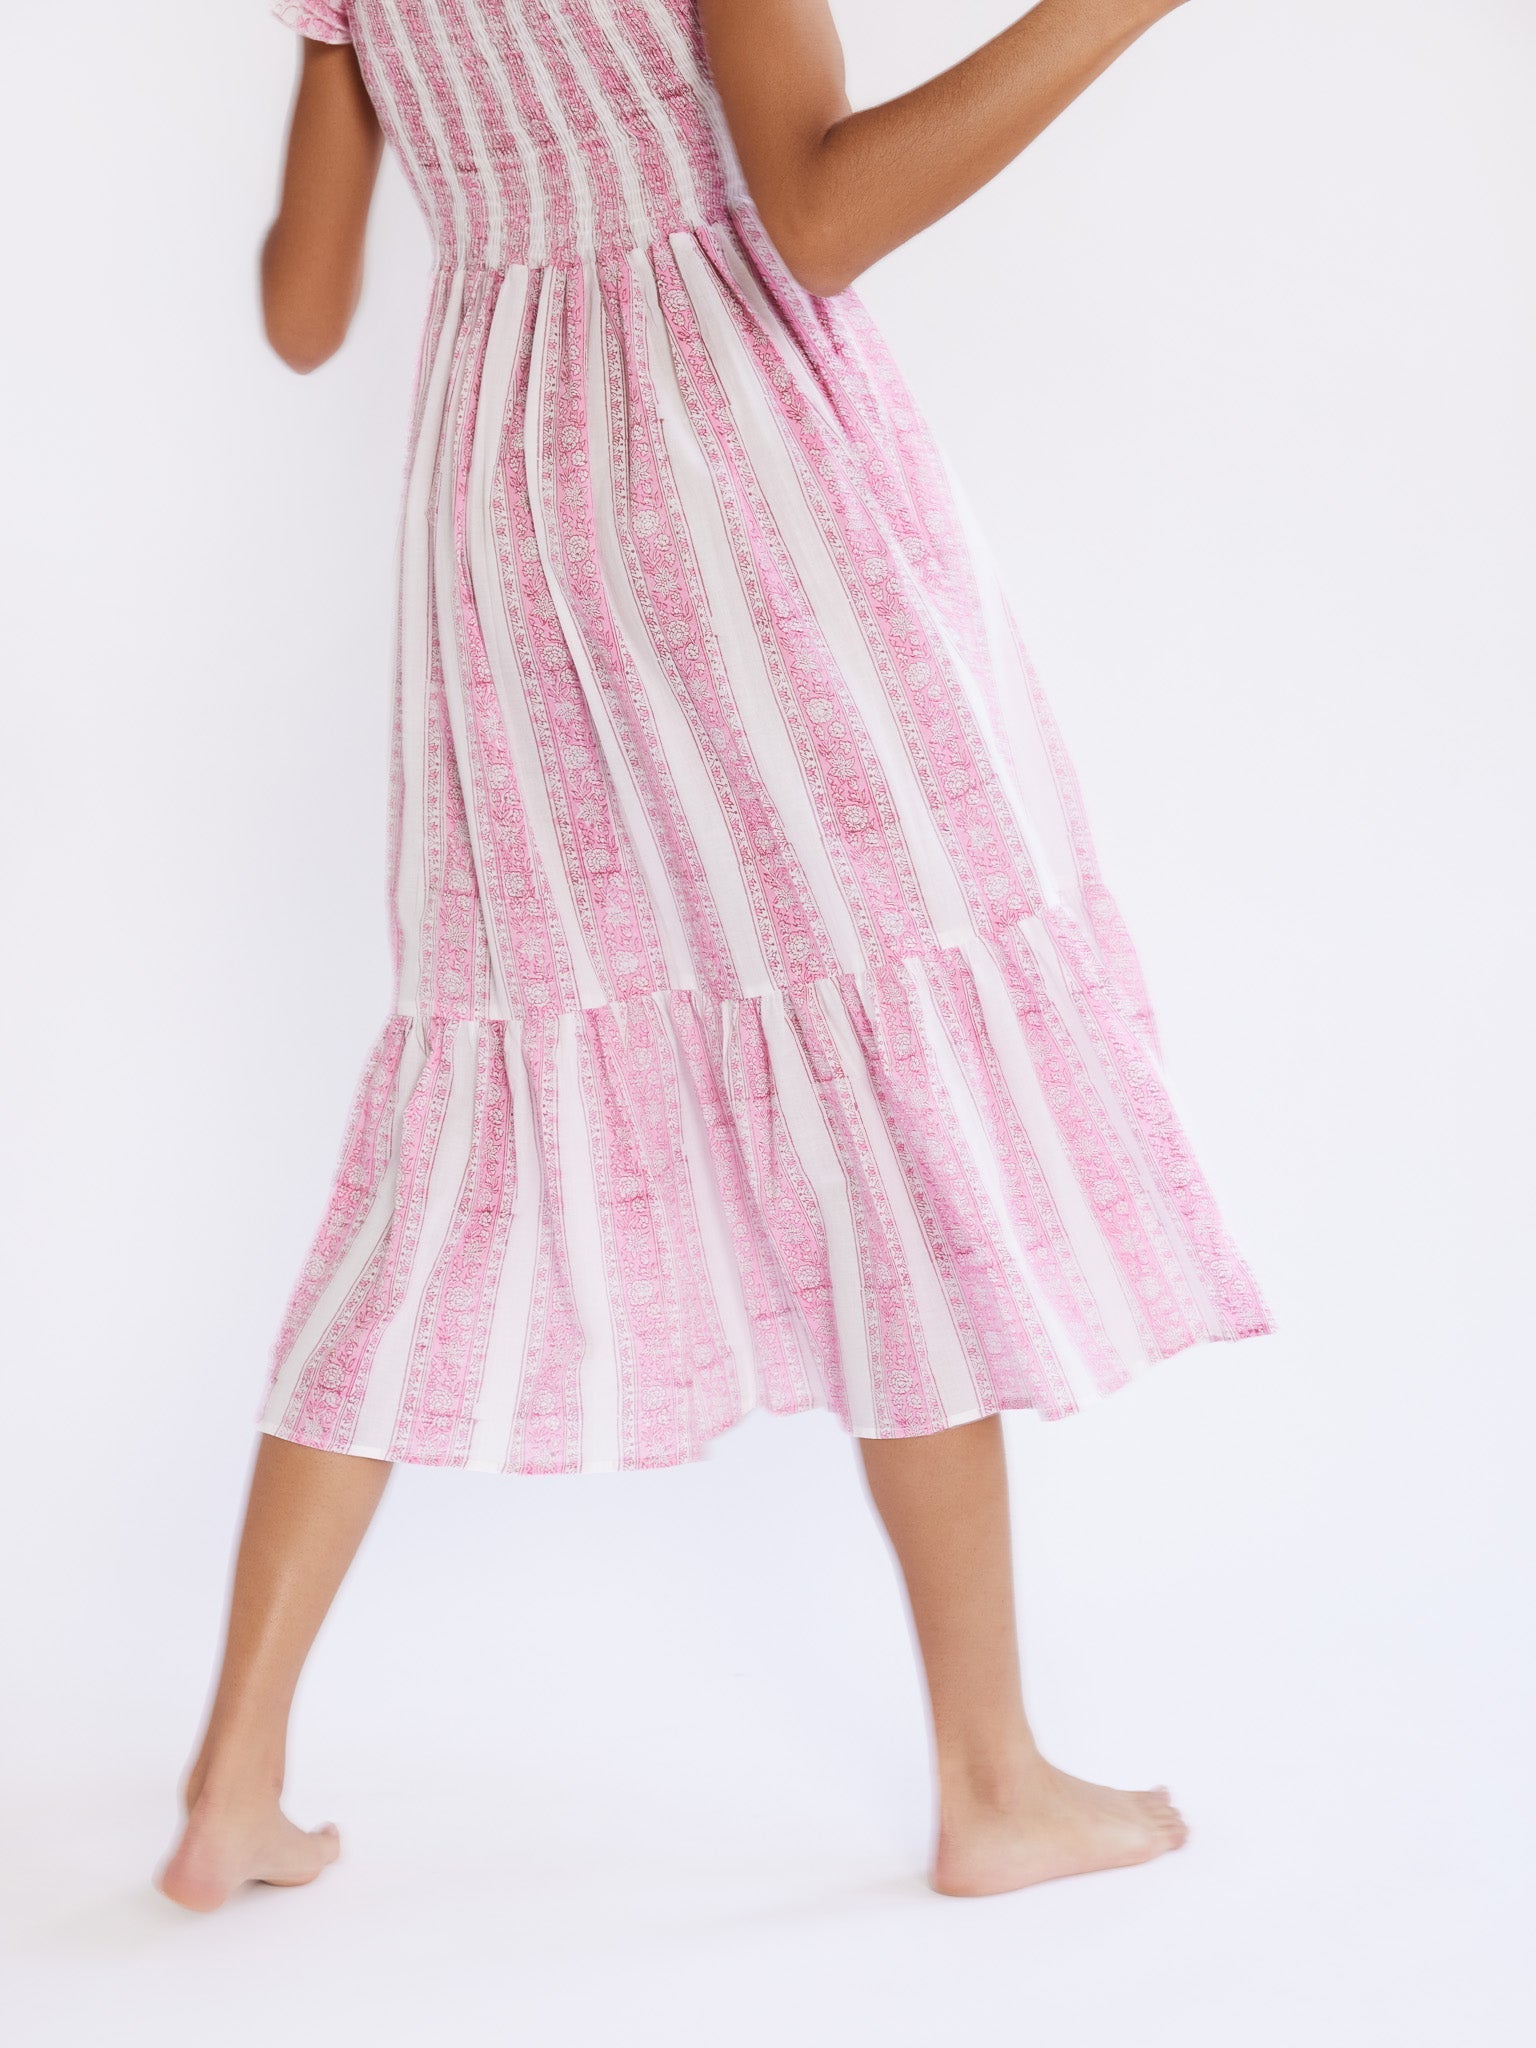 MILLE Clothing Olympia Dress in Jaipur Stripe